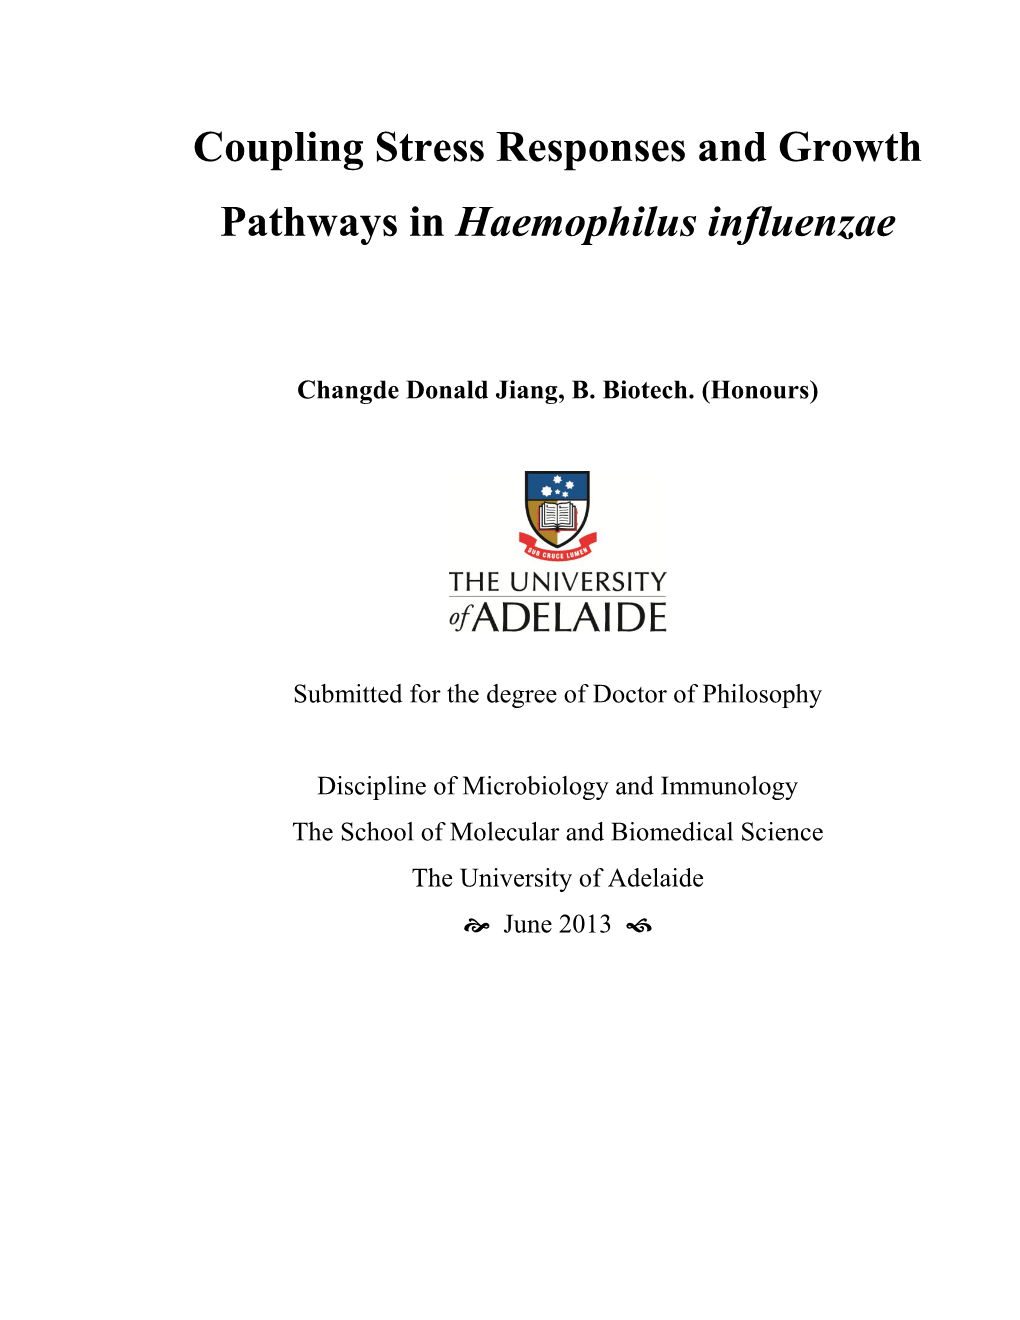 Coupling Stress Responses and Growth Pathways in Haemophilus Influenzae